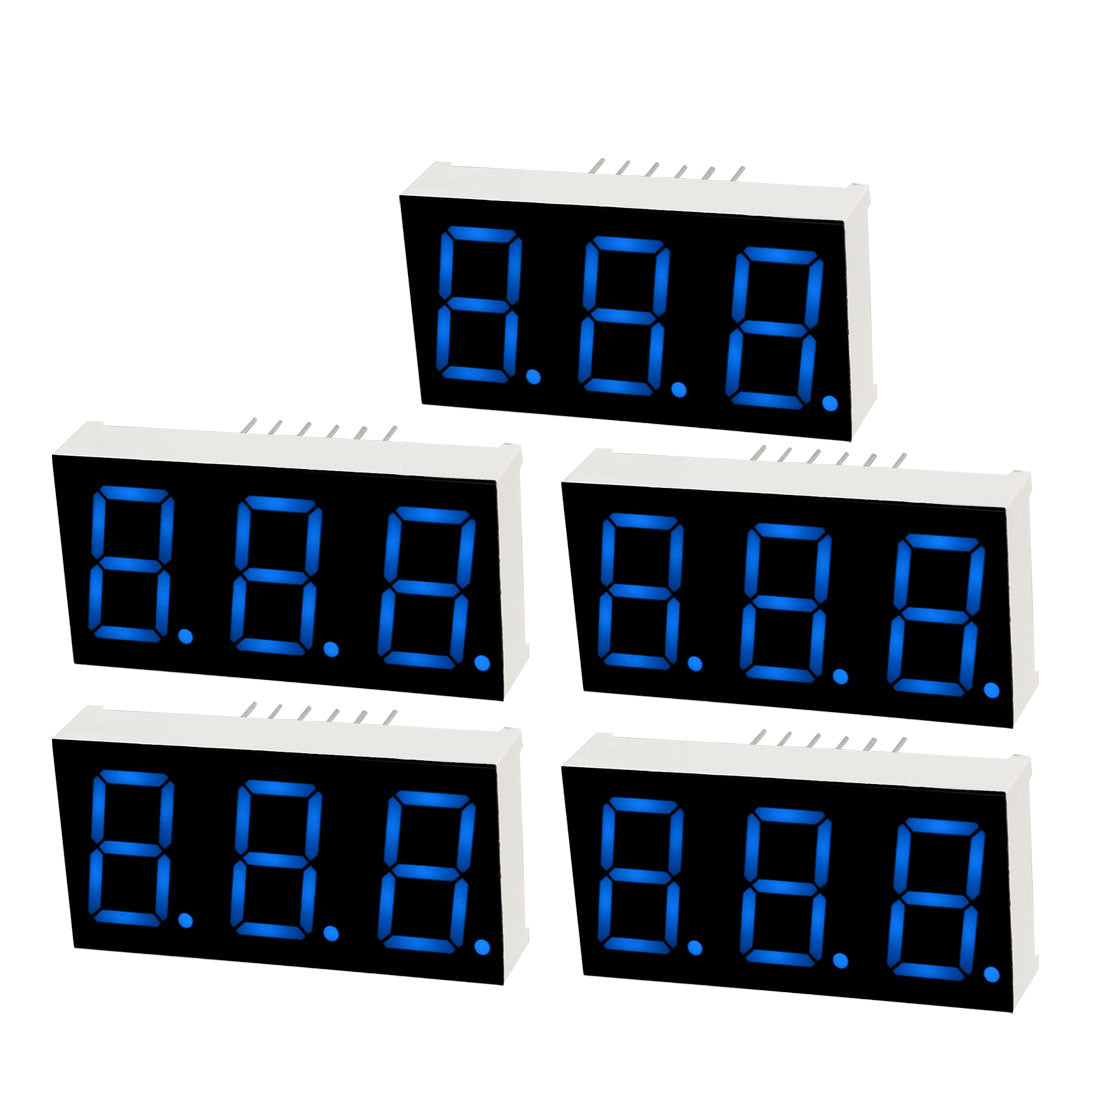 uxcell Uxcell Common Anode 12 Pin 3 Bit 7 Segment 1.48 x 0.75 x 0.31 Inch 0.55" Blue LED Display Digital Tube 5pcs